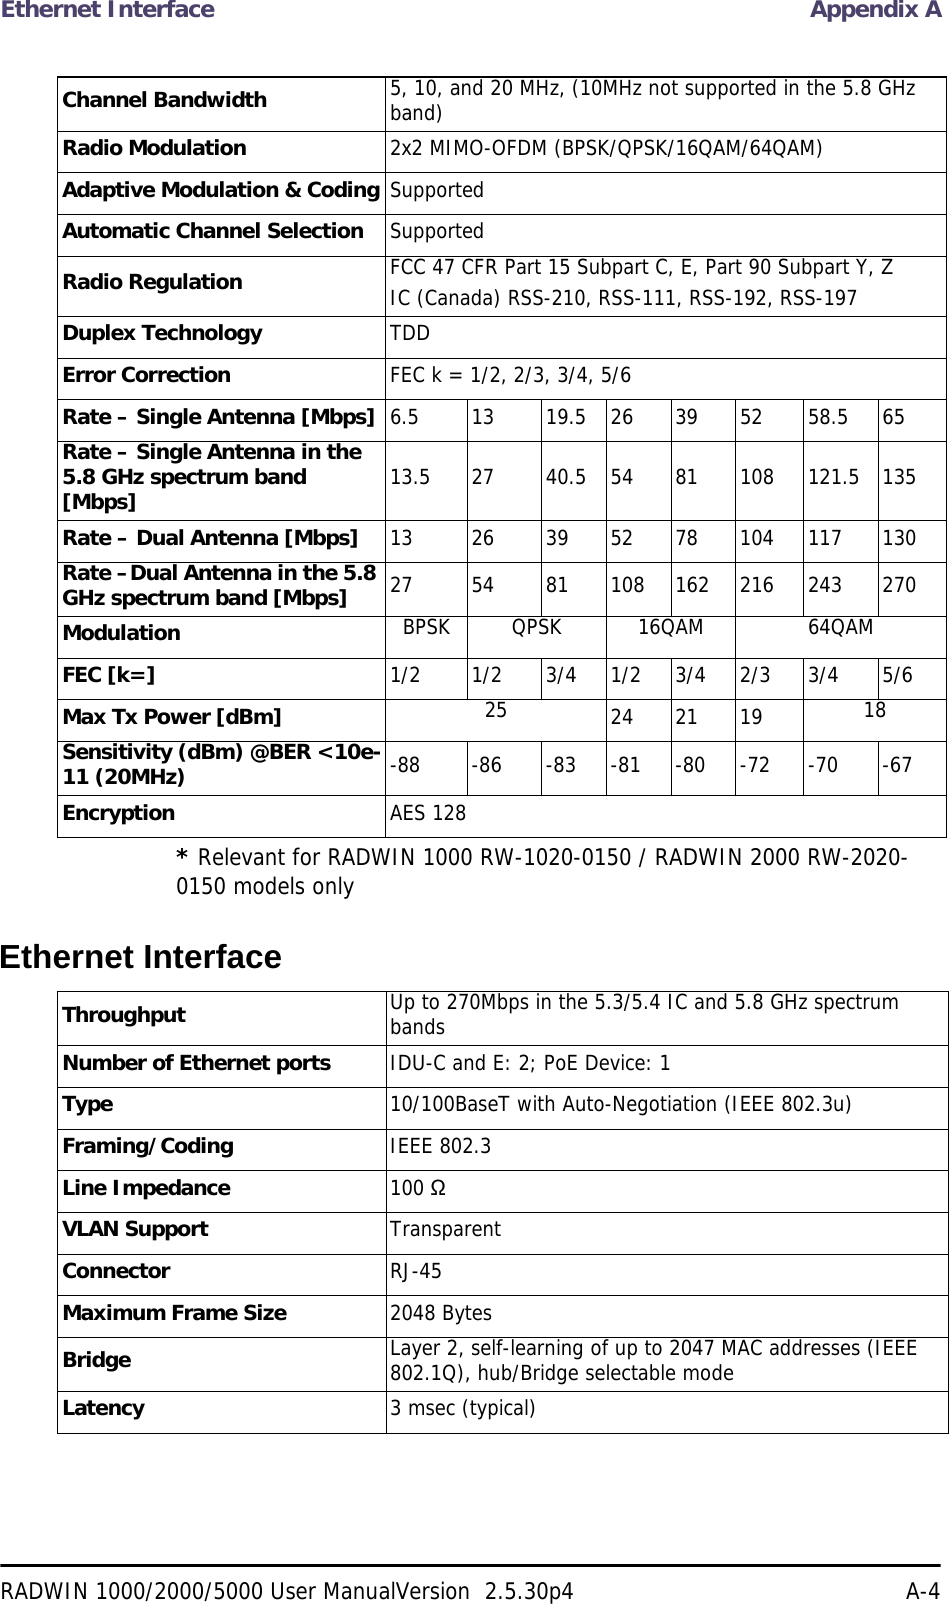 Ethernet Interface Appendix ARADWIN 1000/2000/5000 User ManualVersion  2.5.30p4 A-4* Relevant for RADWIN 1000 RW-1020-0150 / RADWIN 2000 RW-2020-0150 models onlyEthernet InterfaceChannel Bandwidth 5, 10, and 20 MHz, (10MHz not supported in the 5.8 GHz band)Radio Modulation 2x2 MIMO-OFDM (BPSK/QPSK/16QAM/64QAM)Adaptive Modulation &amp; Coding SupportedAutomatic Channel Selection SupportedRadio Regulation FCC 47 CFR Part 15 Subpart C, E, Part 90 Subpart Y, ZIC (Canada) RSS-210, RSS-111, RSS-192, RSS-197Duplex Technology TDDError Correction FEC k = 1/2, 2/3, 3/4, 5/6Rate – Single Antenna [Mbps] 6.5 13 19.5 26 39 52 58.5 65Rate – Single Antenna in the 5.8 GHz spectrum band [Mbps] 13.5 27 40.5 54 81 108 121.5 135Rate – Dual Antenna [Mbps] 13 26 39 52 78 104 117 130Rate –Dual Antenna in the 5.8 GHz spectrum band [Mbps] 27 54 81 108 162 216 243 270Modulation BPSK QPSK 16QAM 64QAMFEC [k=] 1/2 1/2 3/4 1/2 3/4 2/3 3/4 5/6Max Tx Power [dBm] 25 24 21 19 18Sensitivity (dBm) @BER &lt;10e-11 (20MHz) -88 -86 -83 -81 -80 -72 -70 -67Encryption AES 128Throughput Up to 270Mbps in the 5.3/5.4 IC and 5.8 GHz spectrum bandsNumber of Ethernet ports IDU-C and E: 2; PoE Device: 1Type 10/100BaseT with Auto-Negotiation (IEEE 802.3u)Framing/Coding IEEE 802.3Line Impedance 100 ΩVLAN Support TransparentConnector RJ-45Maximum Frame Size 2048 BytesBridge Layer 2, self-learning of up to 2047 MAC addresses (IEEE 802.1Q), hub/Bridge selectable modeLatency 3 msec (typical)